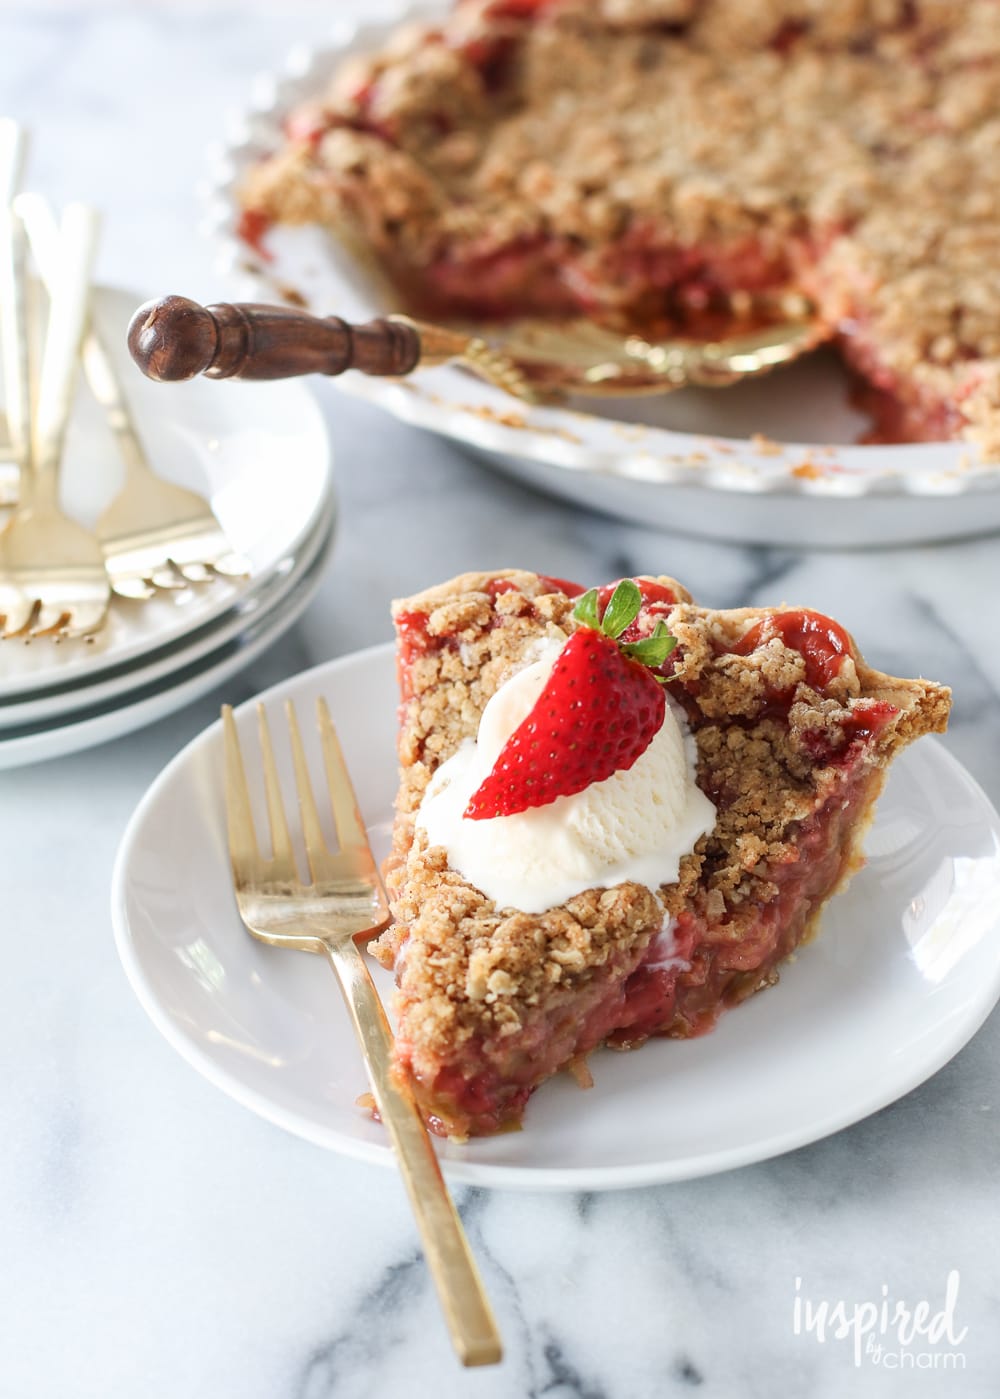 The BEST Strawberry Rhubarb Crumble Pie served on plate with a whole pie in the background.